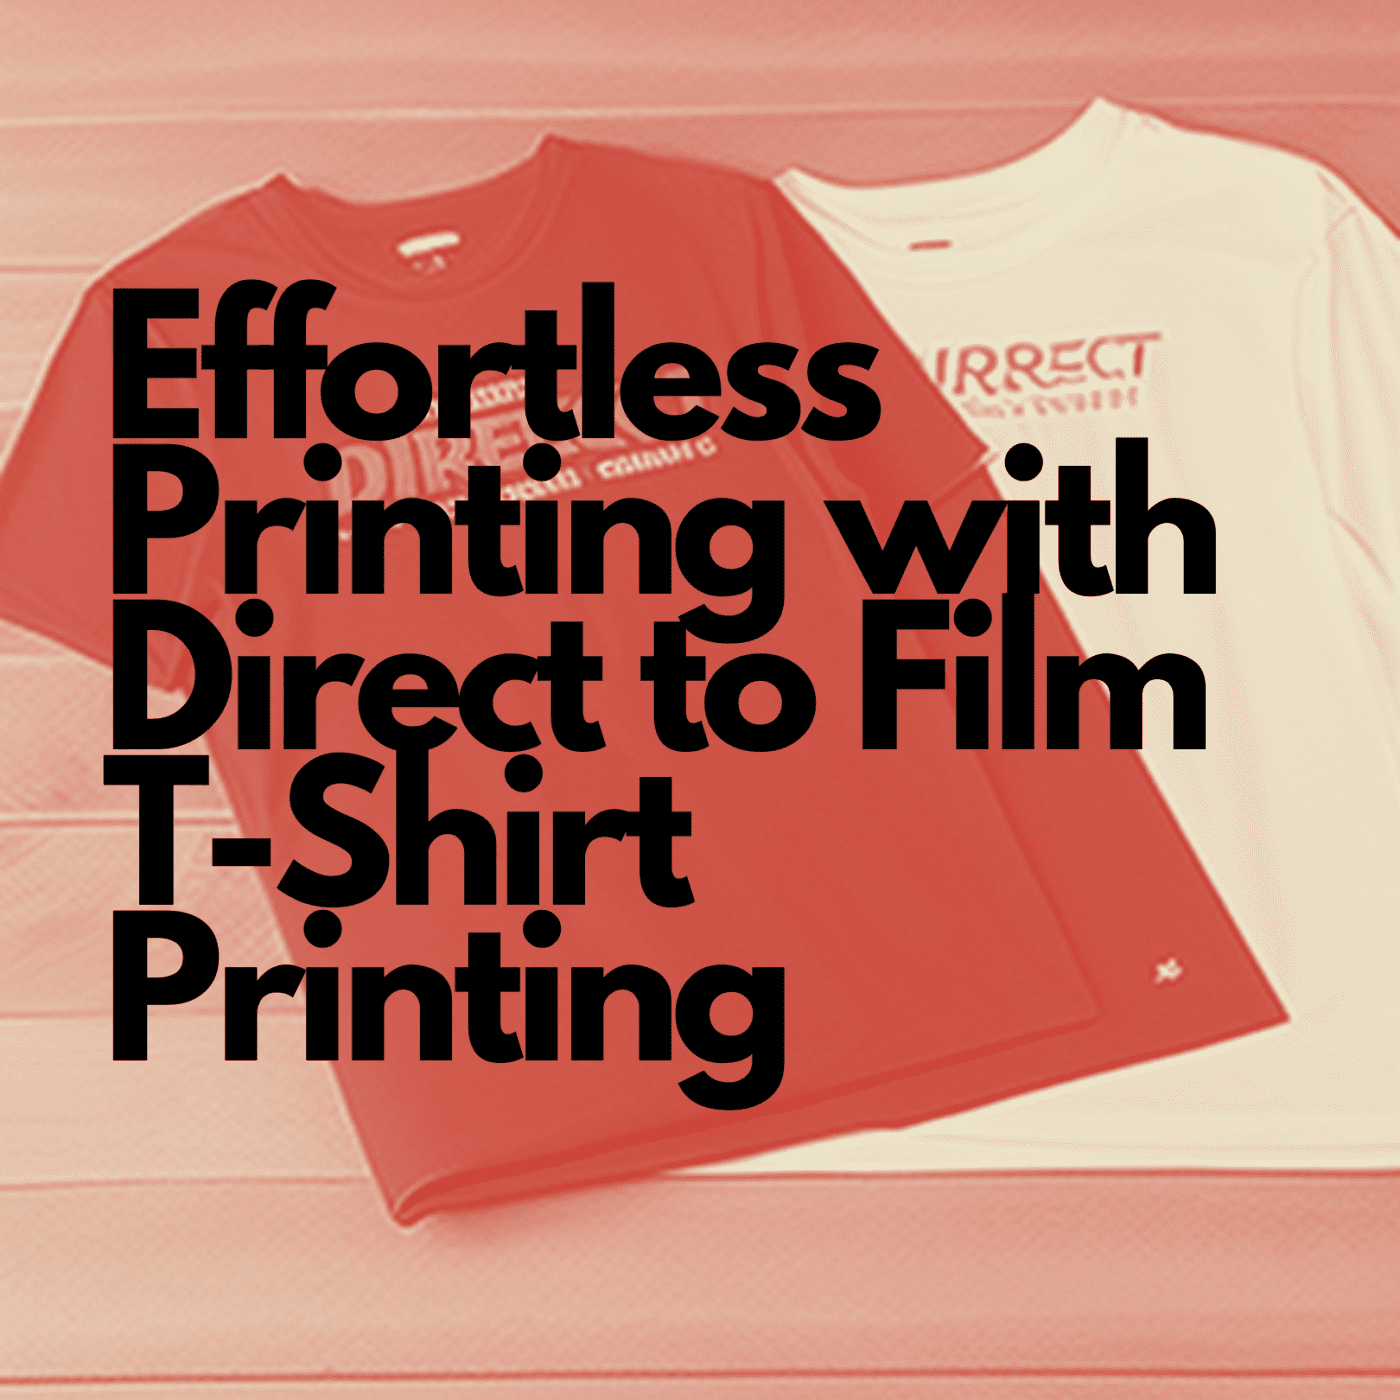 Effortless Printing with Direct to Film T-Shirt Printing, custom t-shirts, t-shirt printing